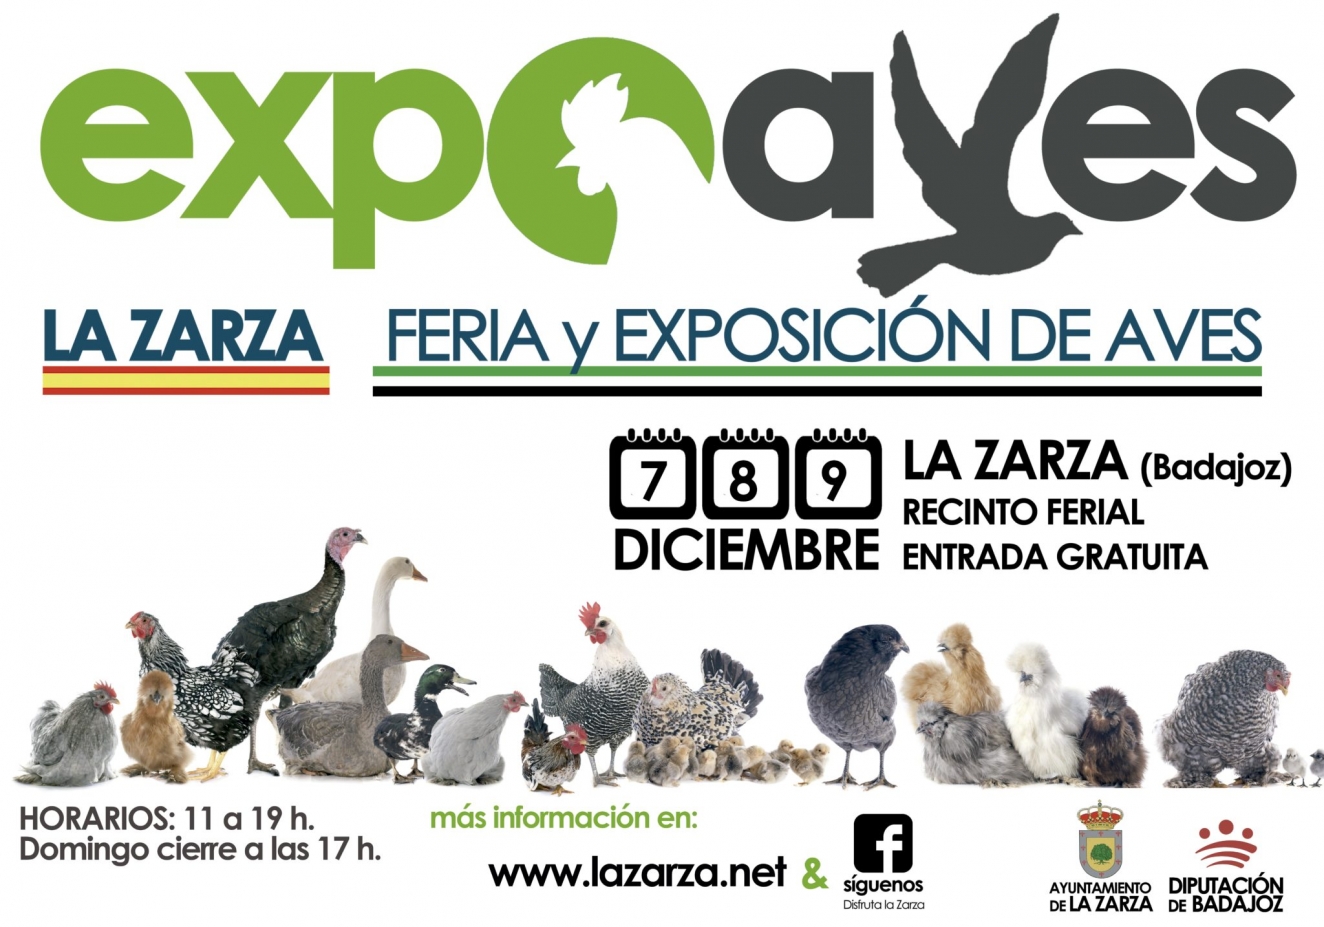 ExpoAves